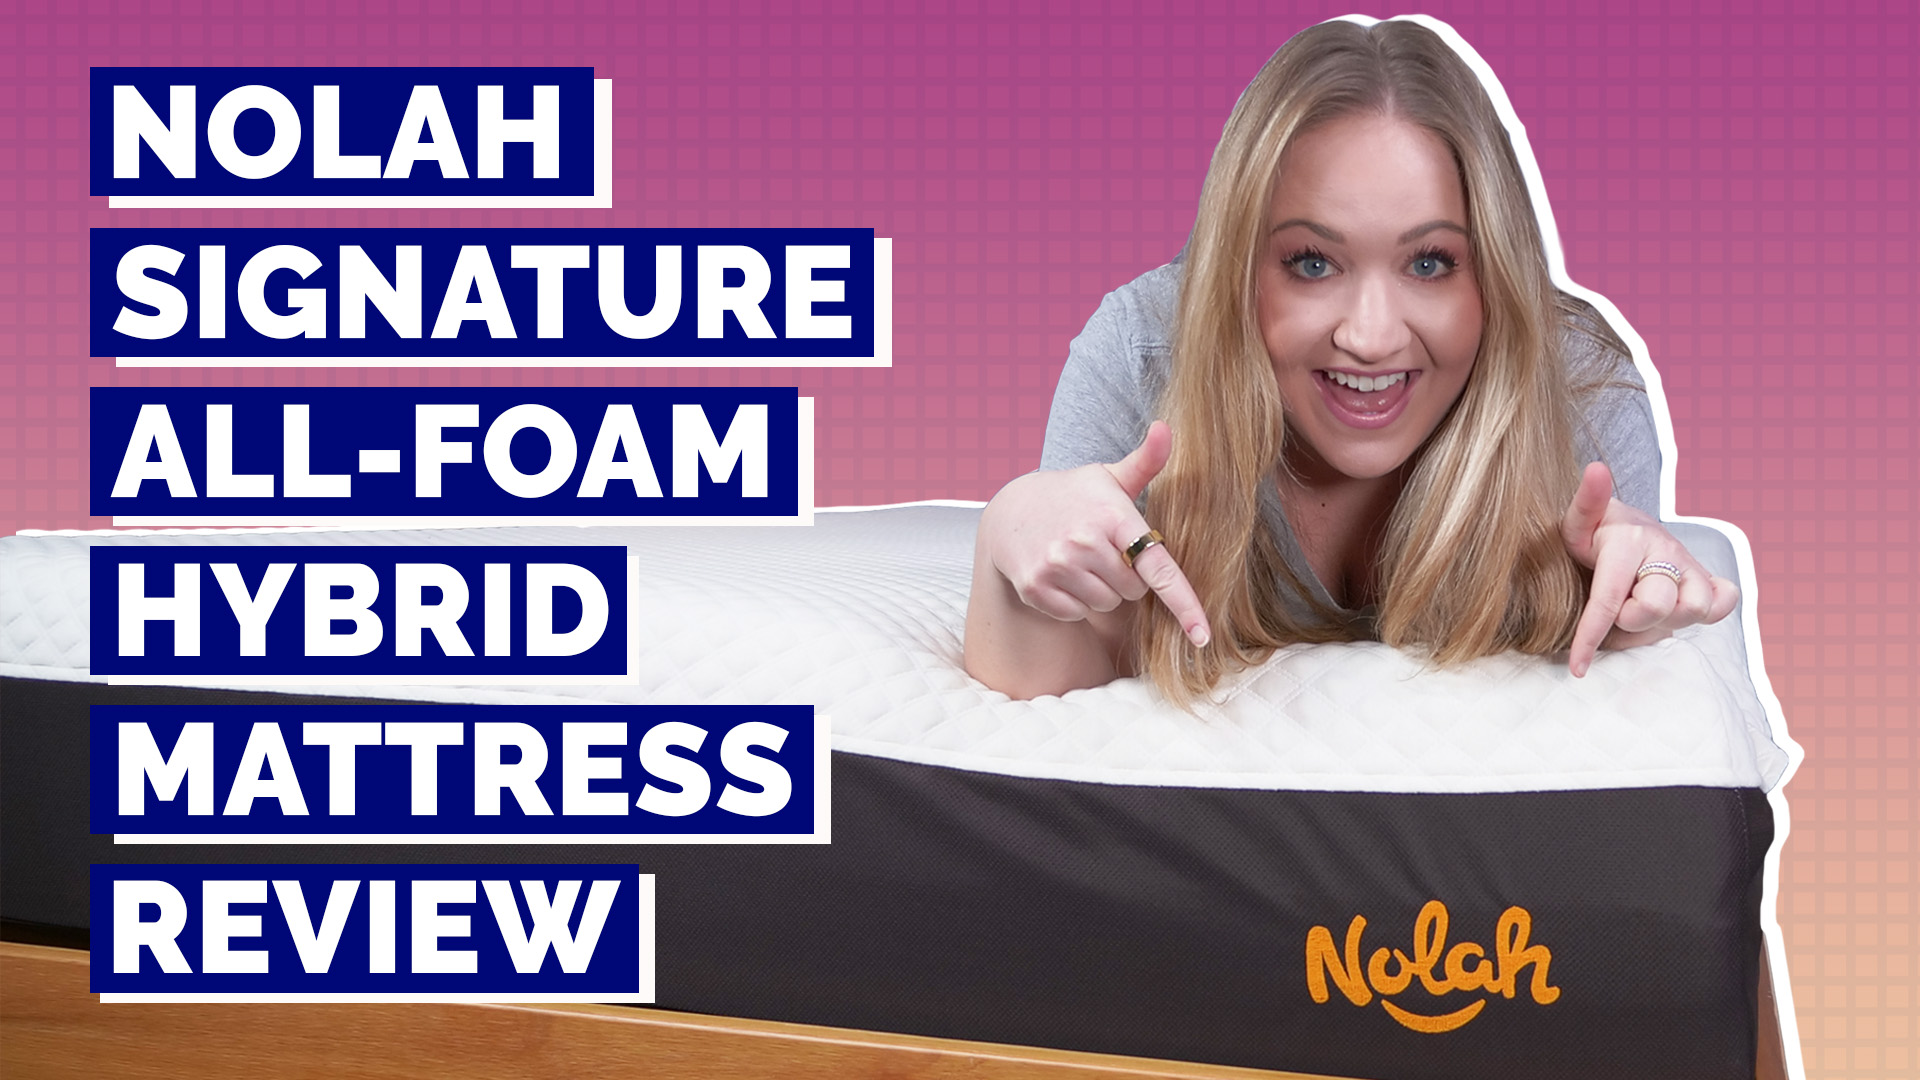 In this Nolah Signature All-Foam Hybrid mattress review, I'll cover th...